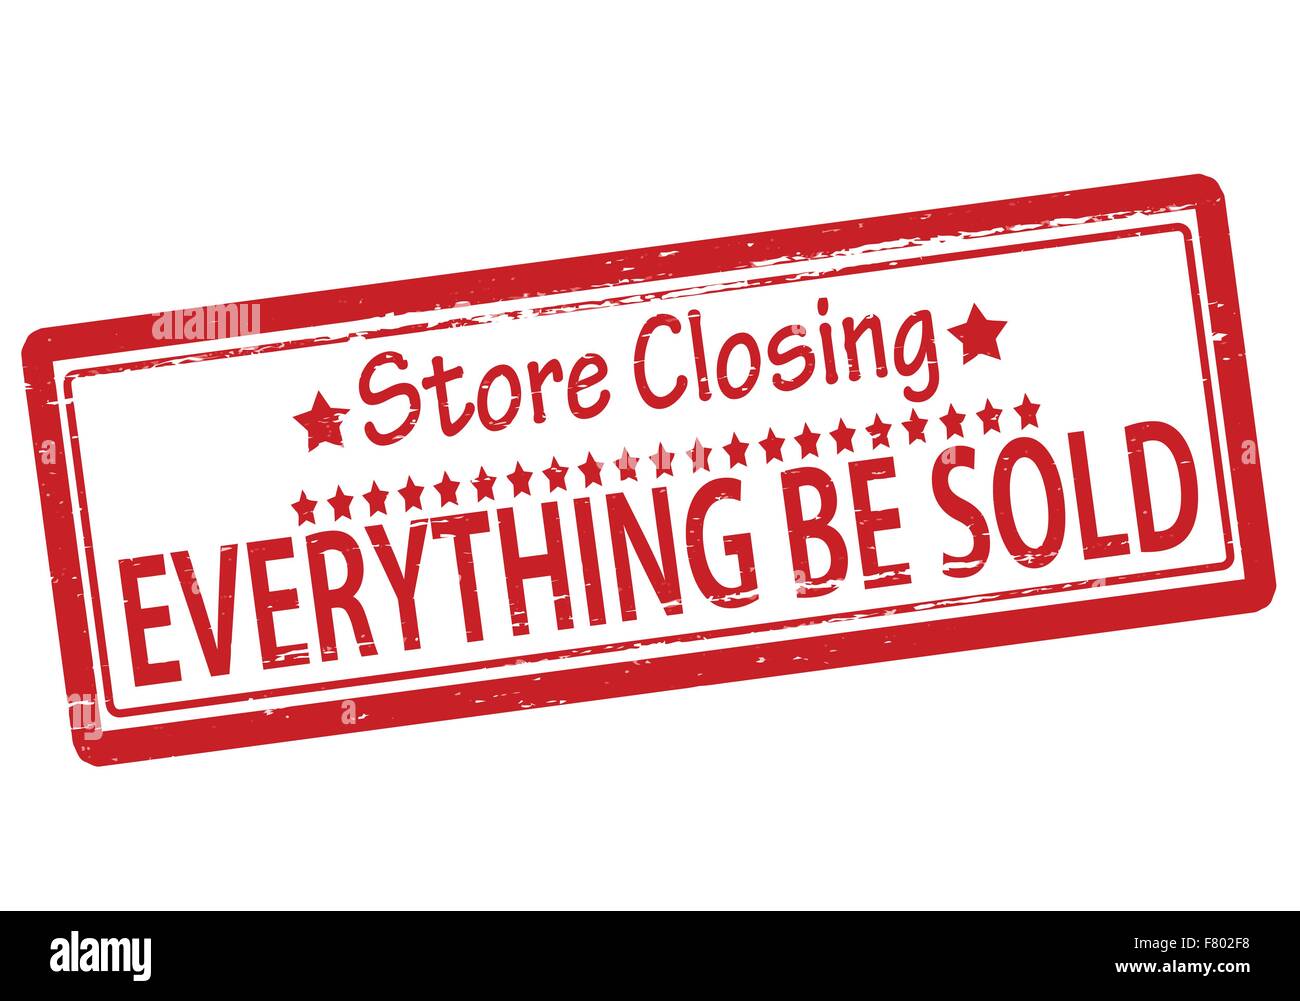 Everything be sold Stock Vector